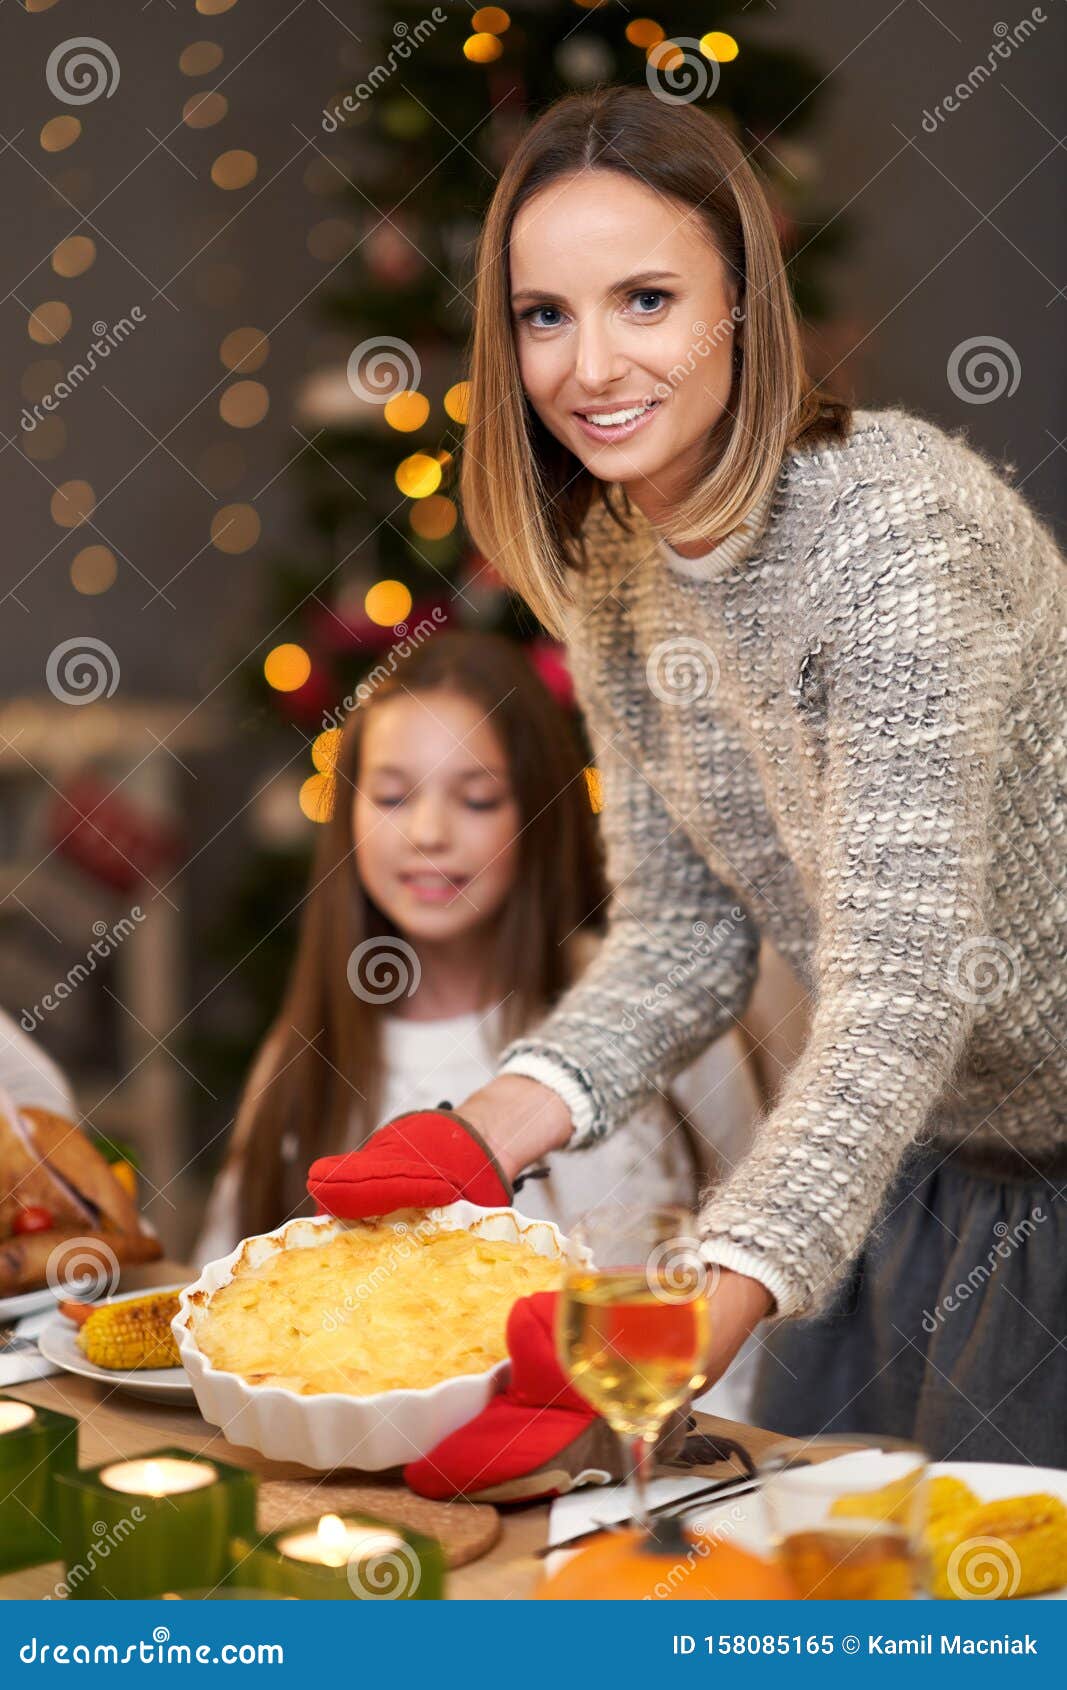 Beautiful Family Eating Christmas Dinner at Home Stock Image - Image of ...